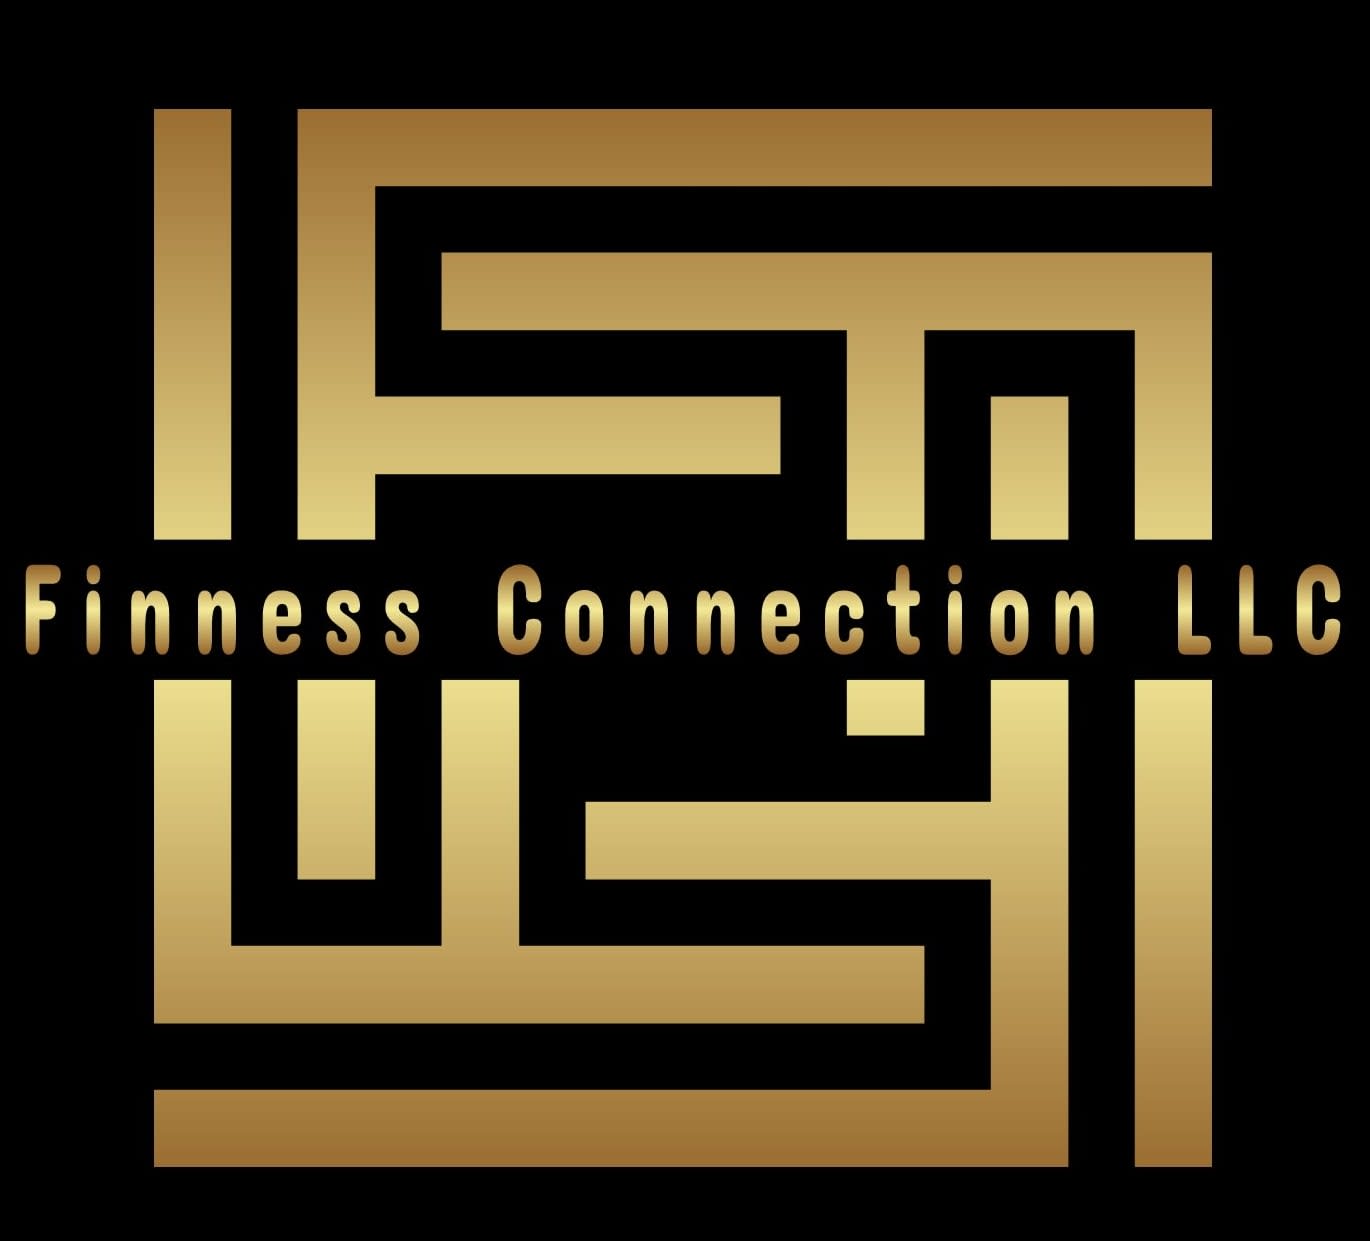 Finness Connection LLC